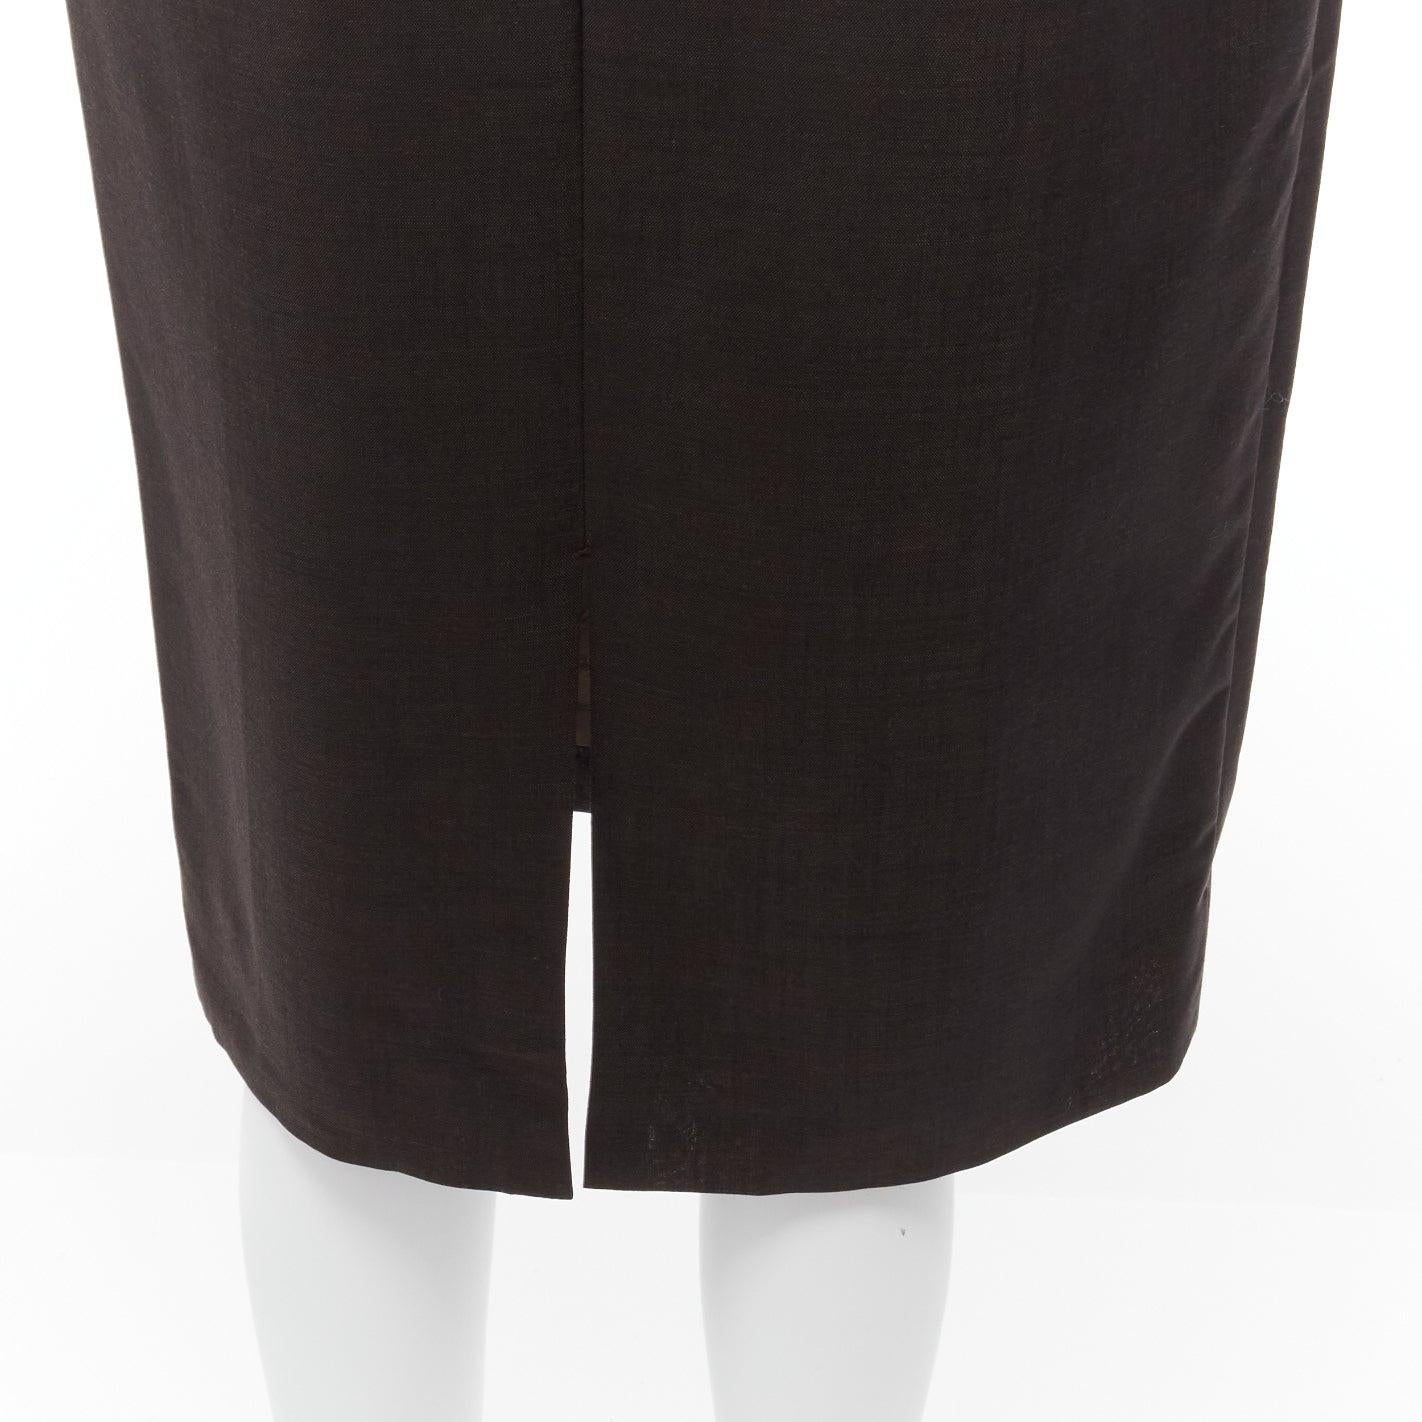 GUCCI Tom Ford Vintage brown wool mohair mid waist back slit pencil skirt IT40 S
Reference: GIYG/A00368
Brand: Gucci
Designer: Tom Ford
Material: Wool, Mohair
Color: Brown
Pattern: Solid
Closure: Zip
Lining: Brown Fabric
Extra Details: Back zip and